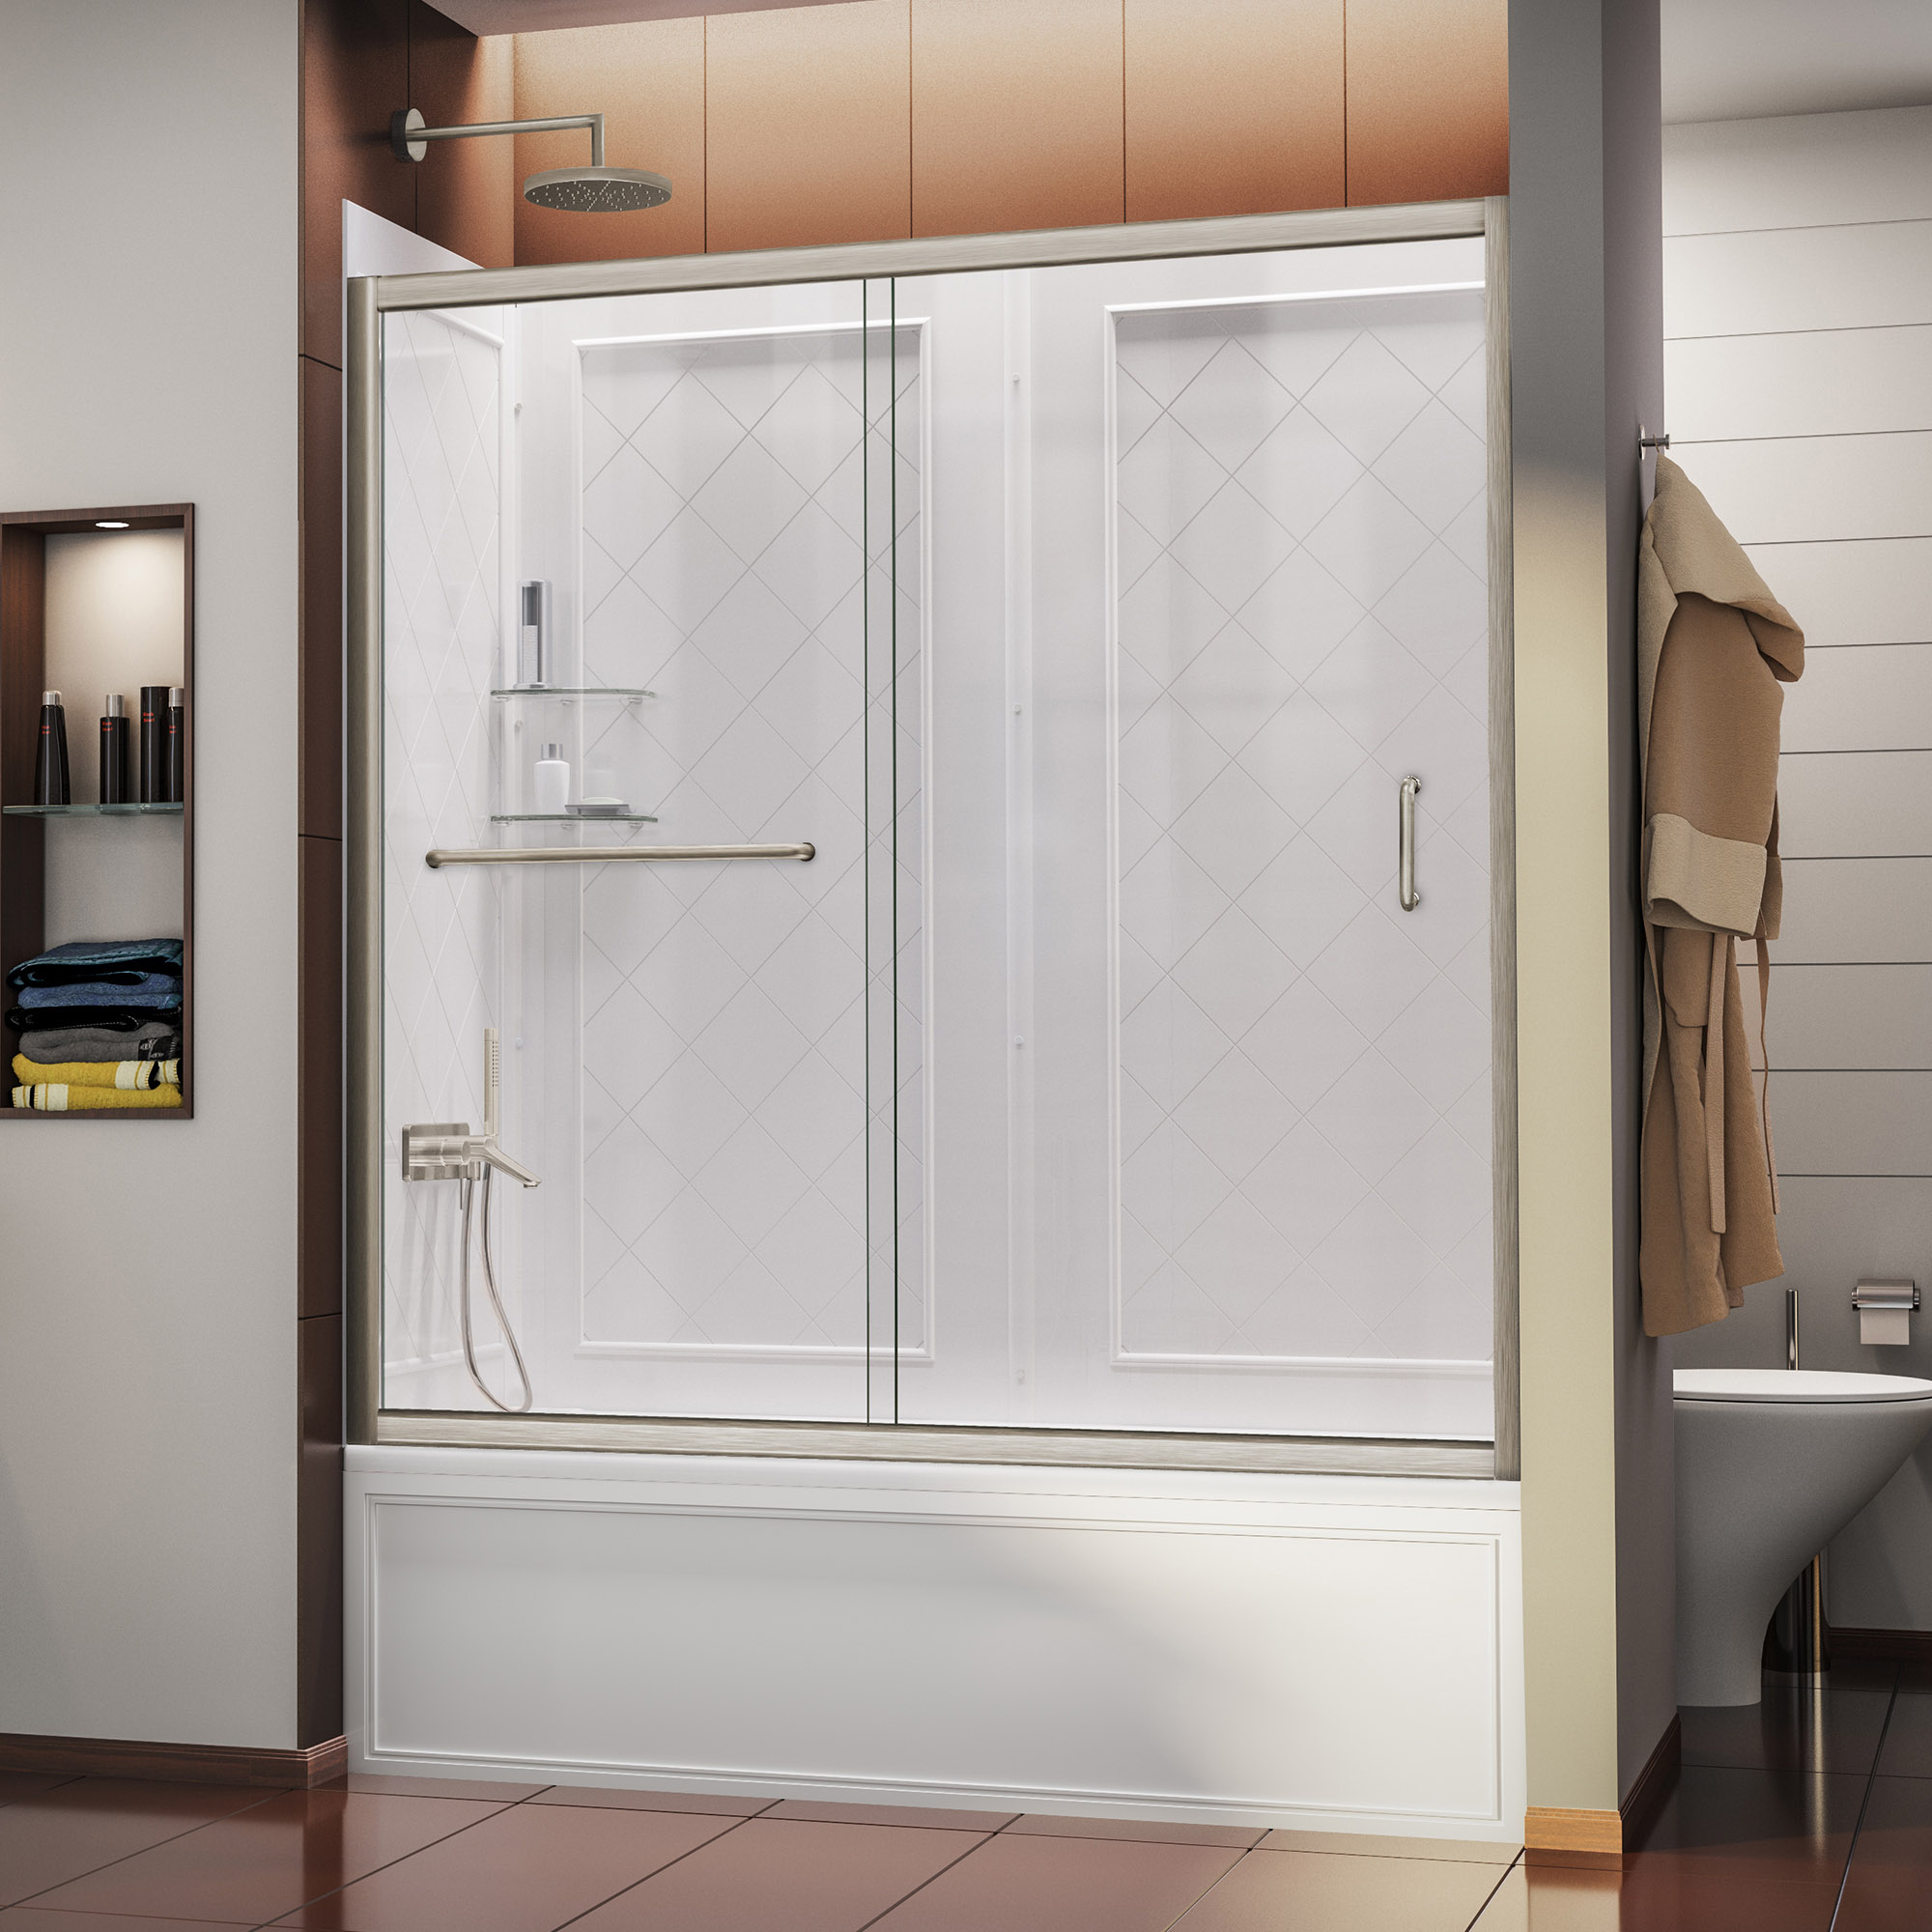 DreamLine Infinity-Z 56-60 in. W x 60 in. H Clear Sliding Tub Door in Brushed Nickel with White Acrylic Backwall Kit - image 1 of 14